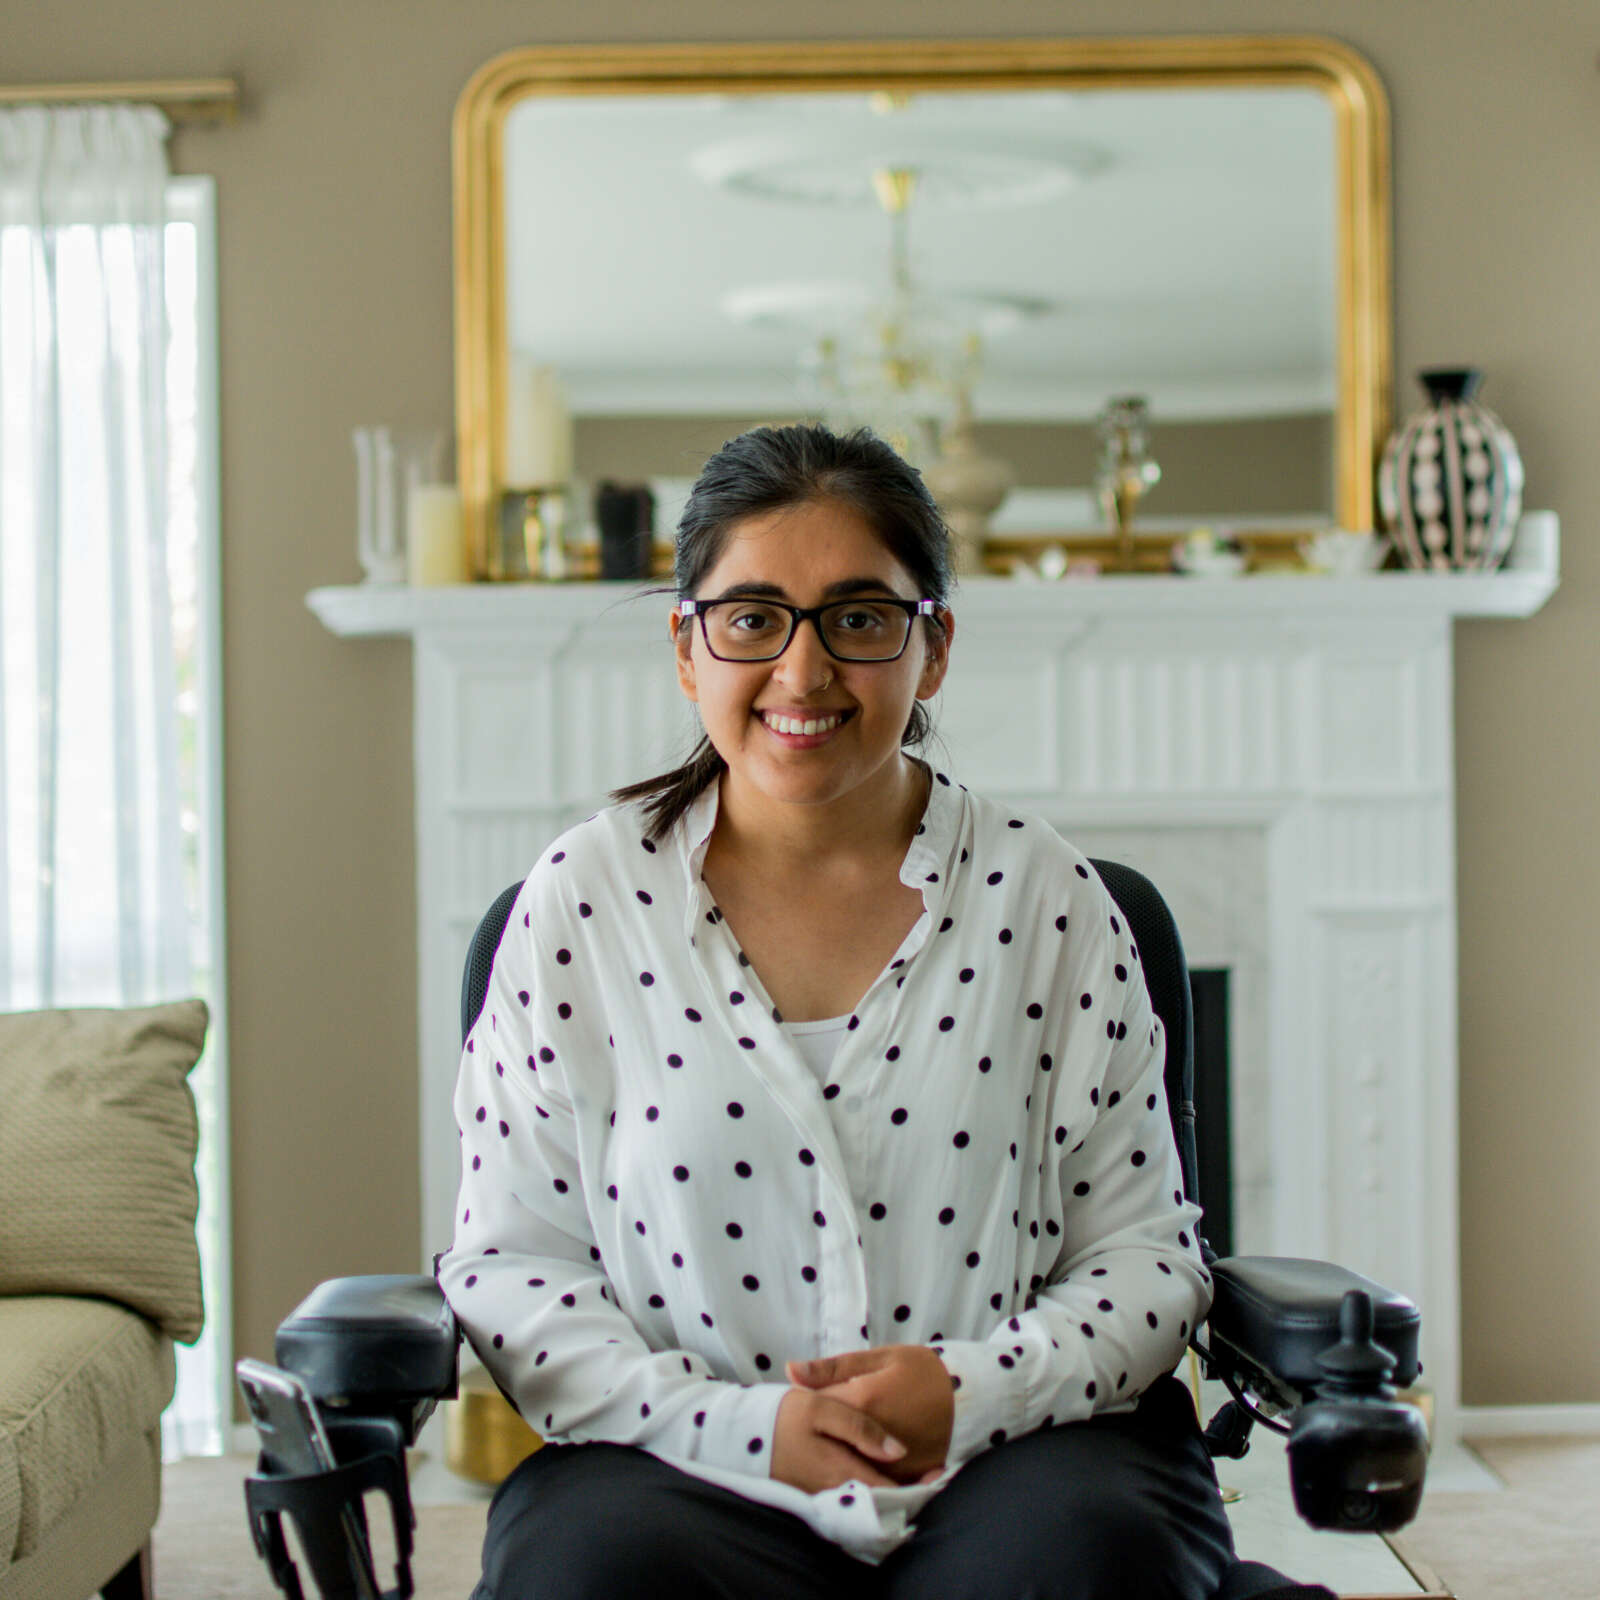 Latifa is in her home, she is in her wheelchair wearing a polka dot sweater